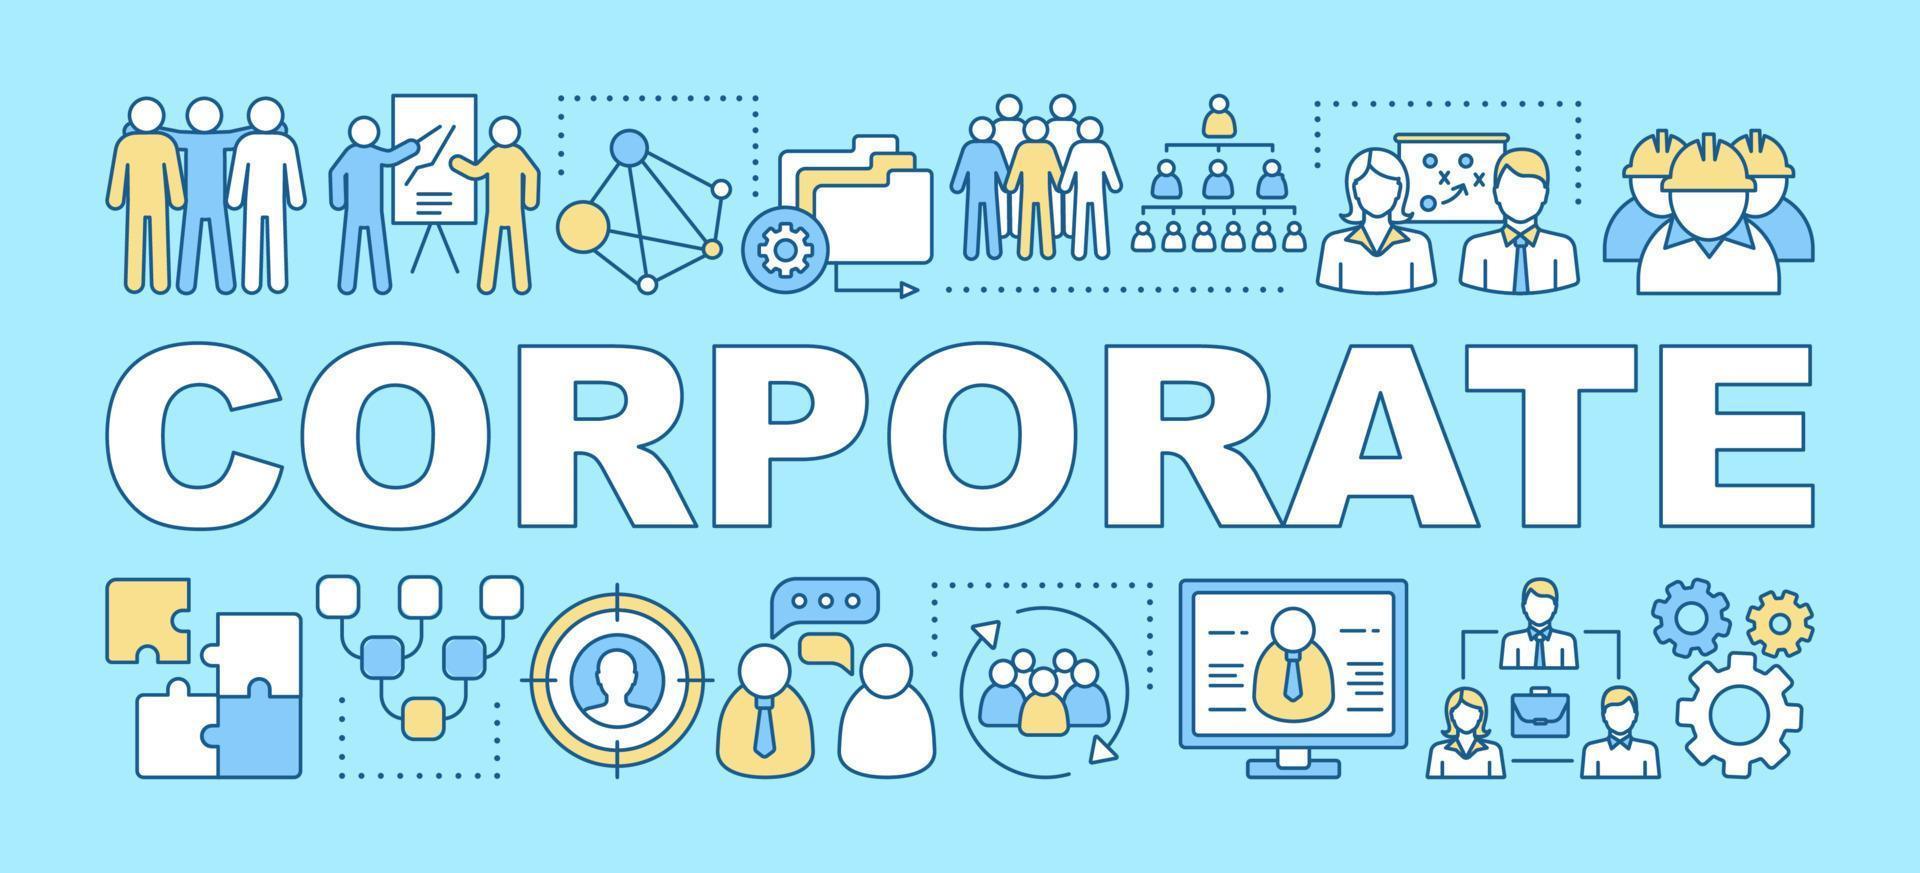 Corporate word concepts banner. Company culture. Partnership. Office work organization. Presentation, website. Isolated lettering typography idea with linear icons. Vector outline illustration